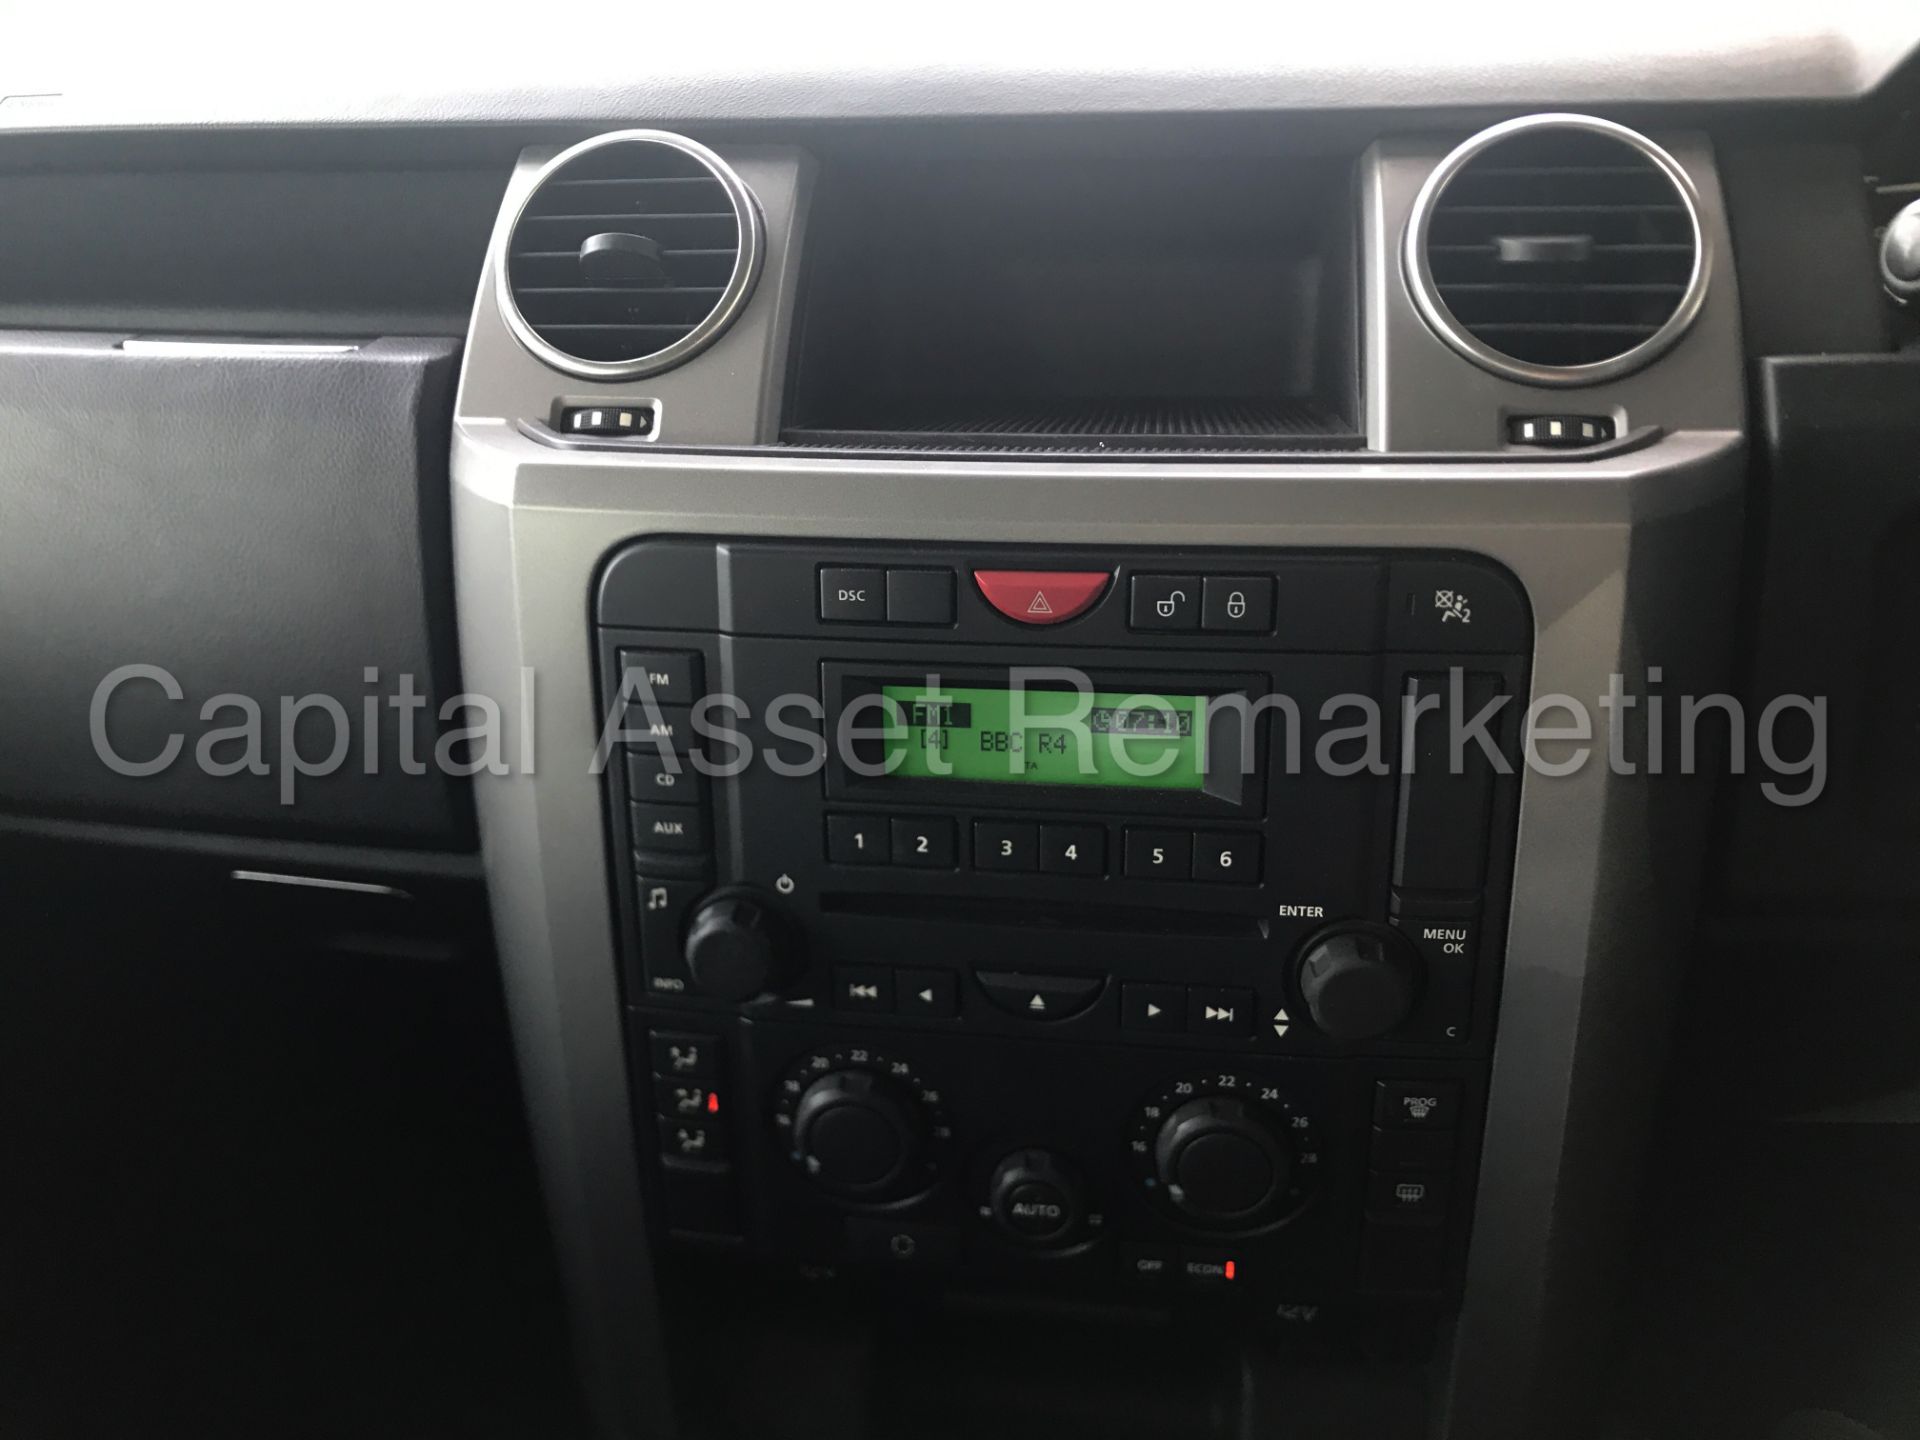 (On Sale) LAND ROVER DISCOVERY 3 (2009) 2.7 TDV6 - AUTO - 7 SEATER - AIR SUSPENSION (NO VAT) - Image 26 of 29